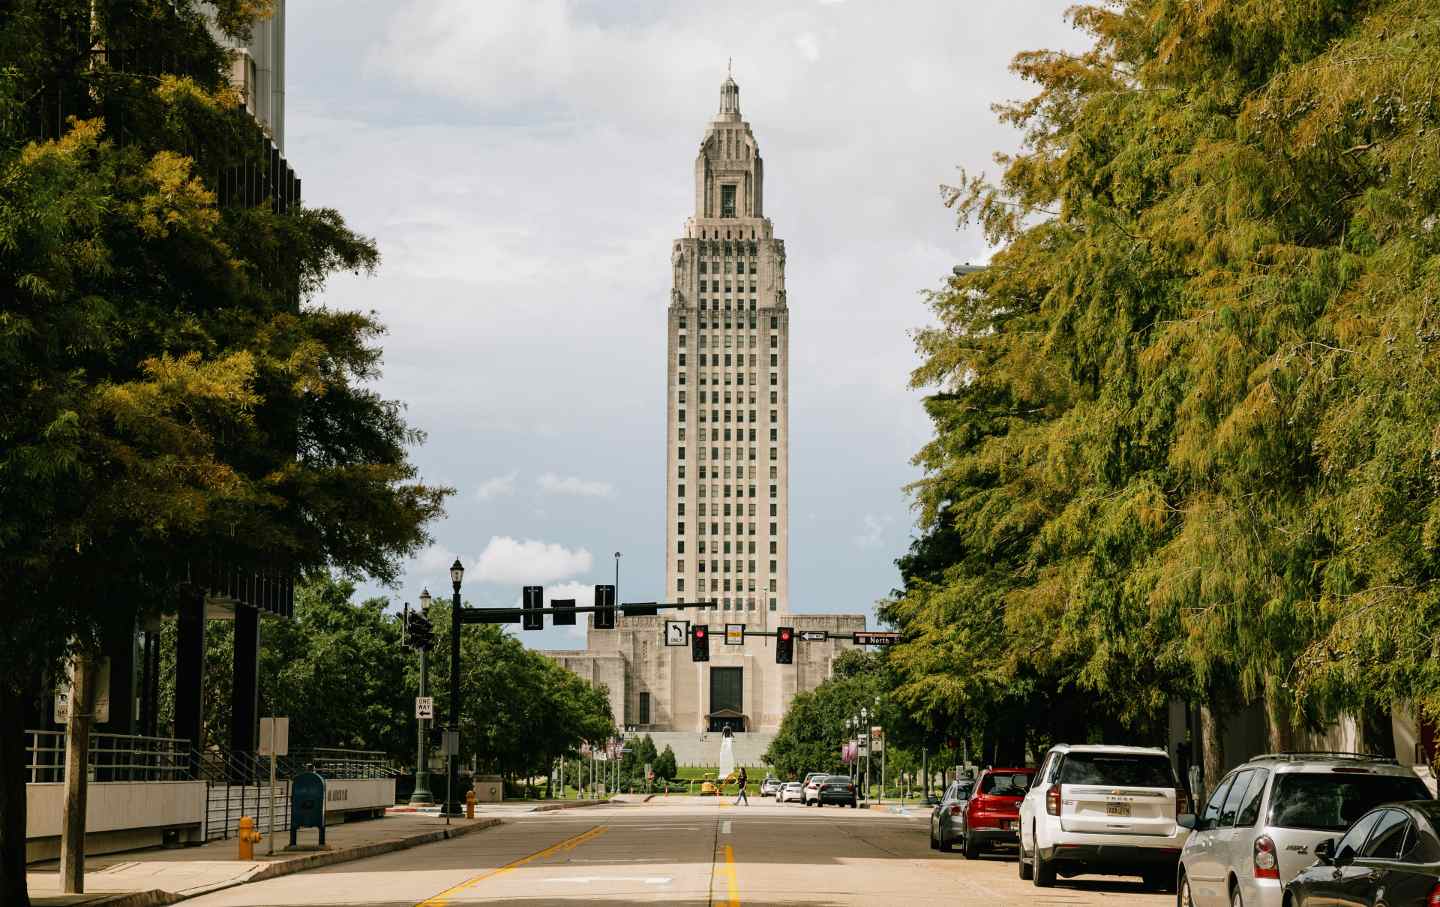 A view of the tower of the Louisiana State Capitol, framed by trees.